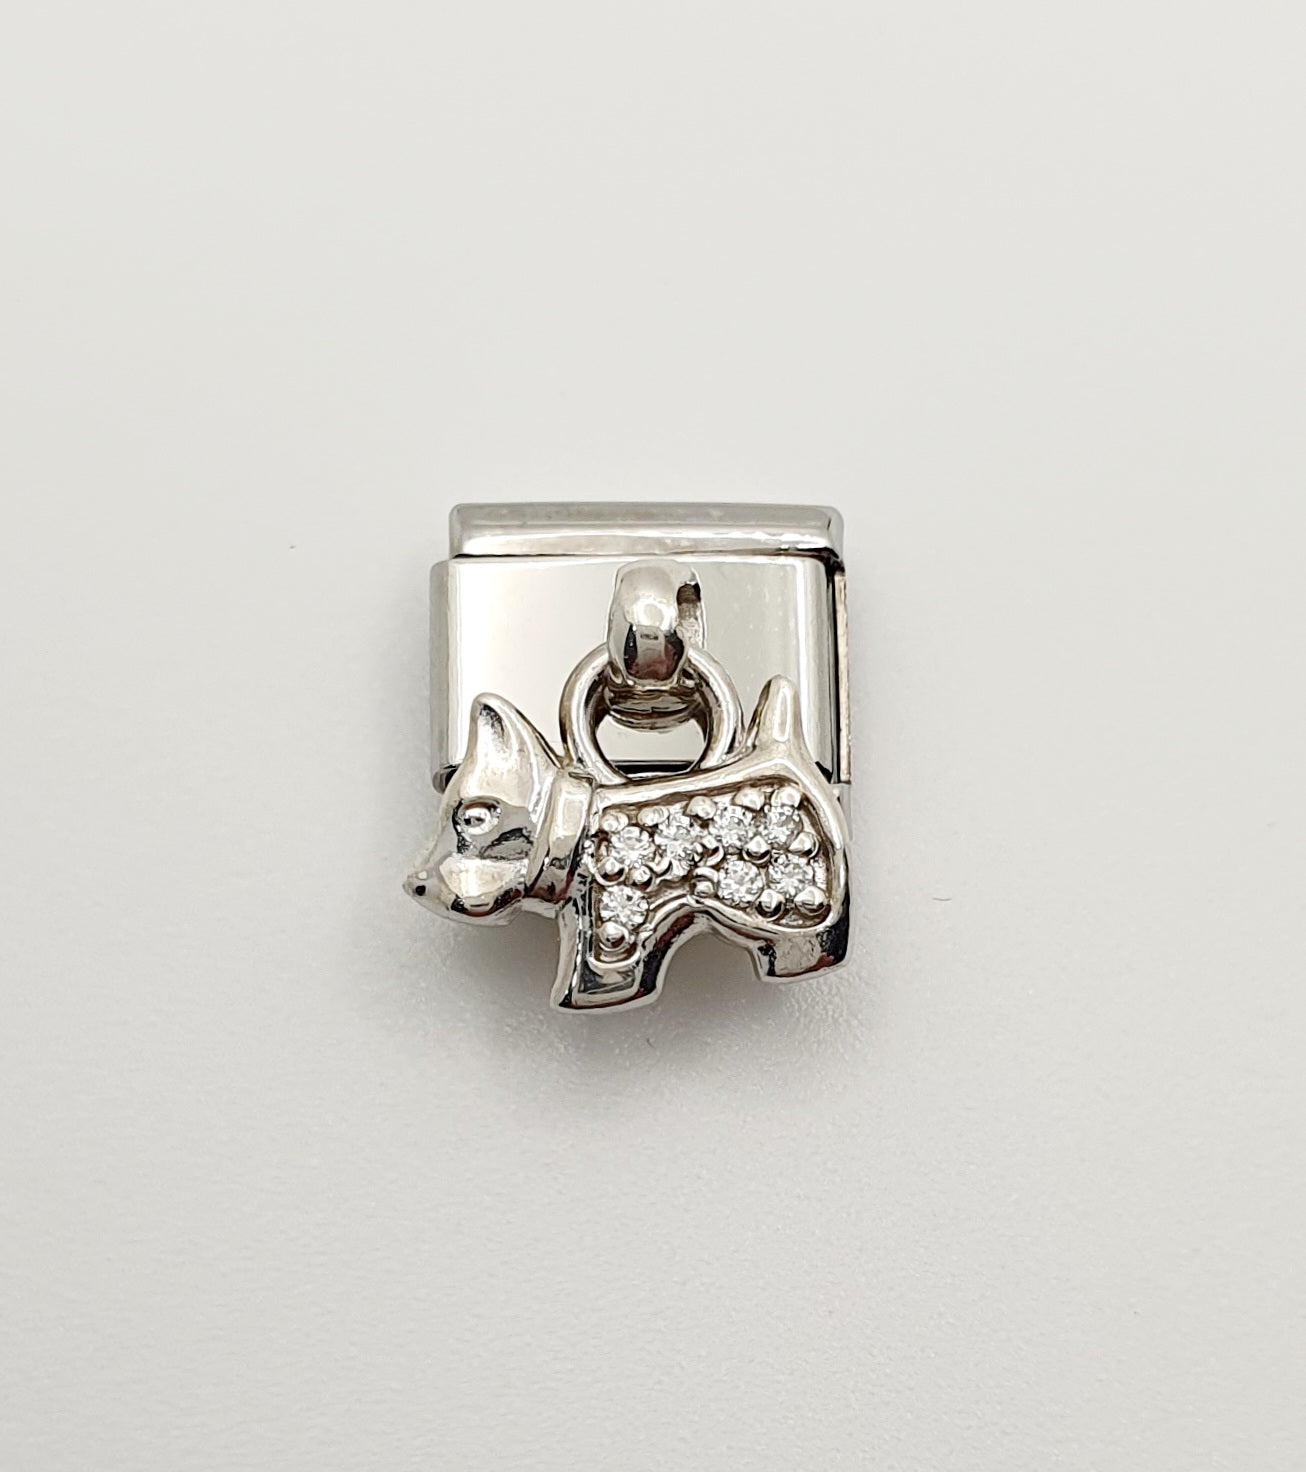 Nomination Charm Link "Dog" Stainless Steel with CZ's & 925 Silver, 331800 09